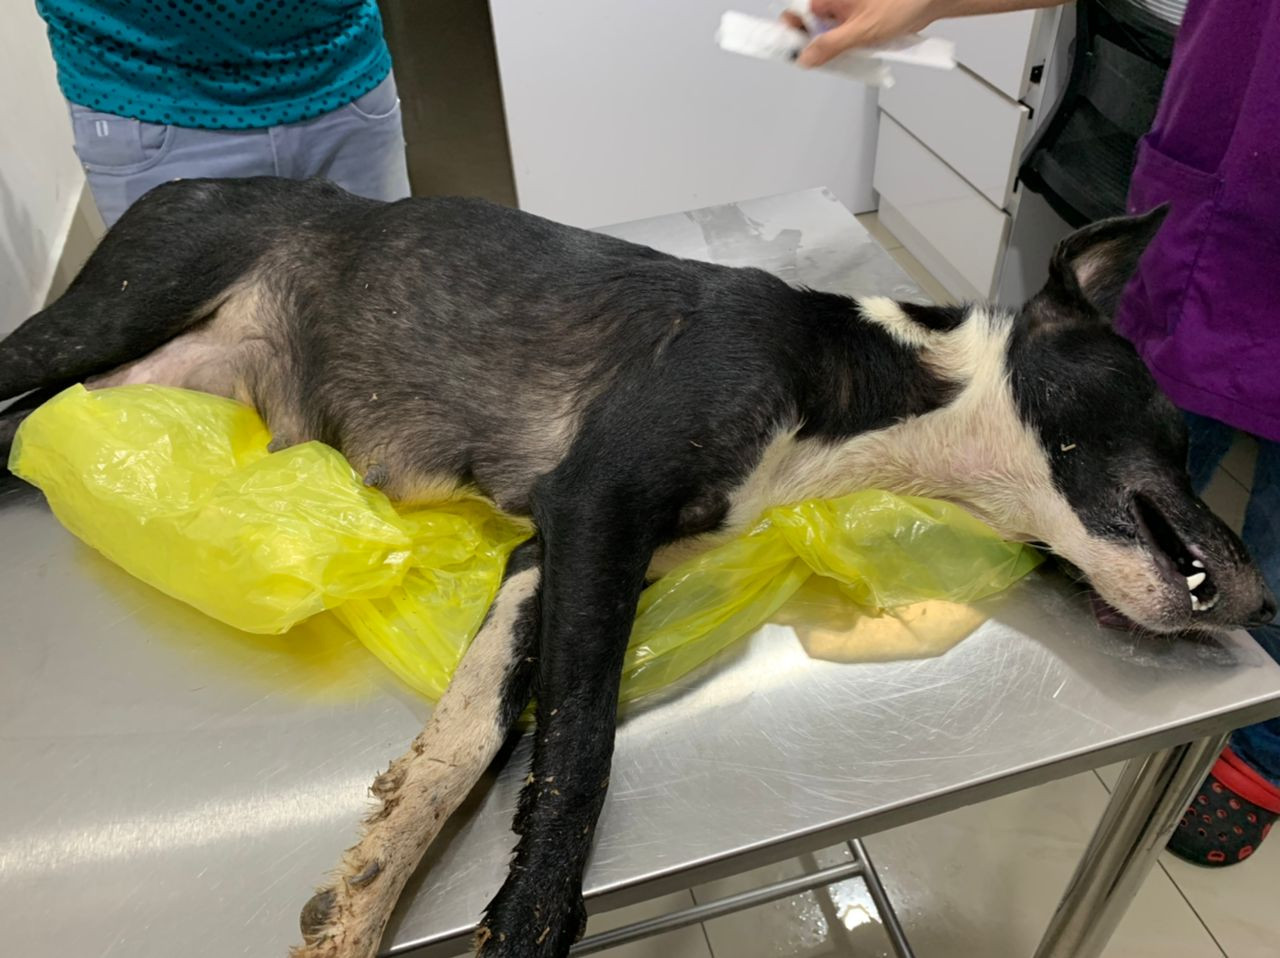 A stray dog found having seizures near ‘suspicious packets of chicken’, and pronounced dead at Gasing Veterinary Hospital. – The Vibes pic, October 15, 2022